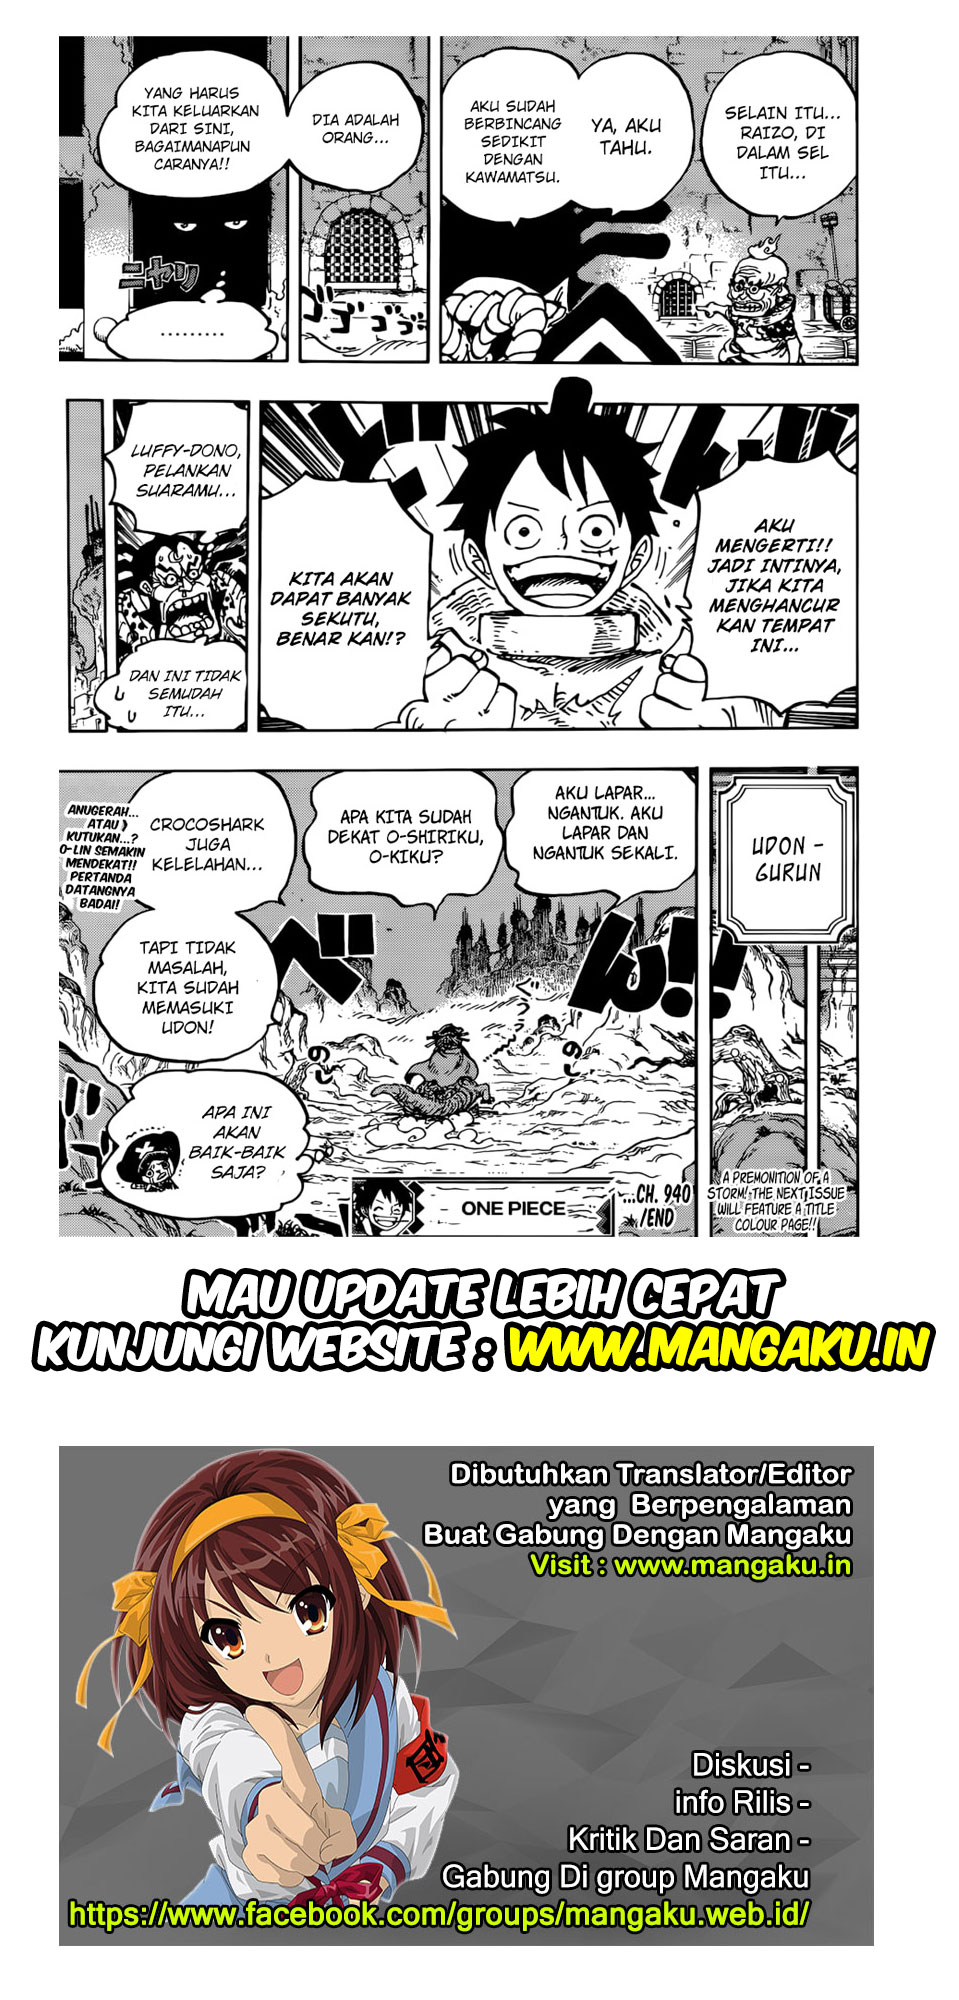 One Piece Chapter 940 - 143